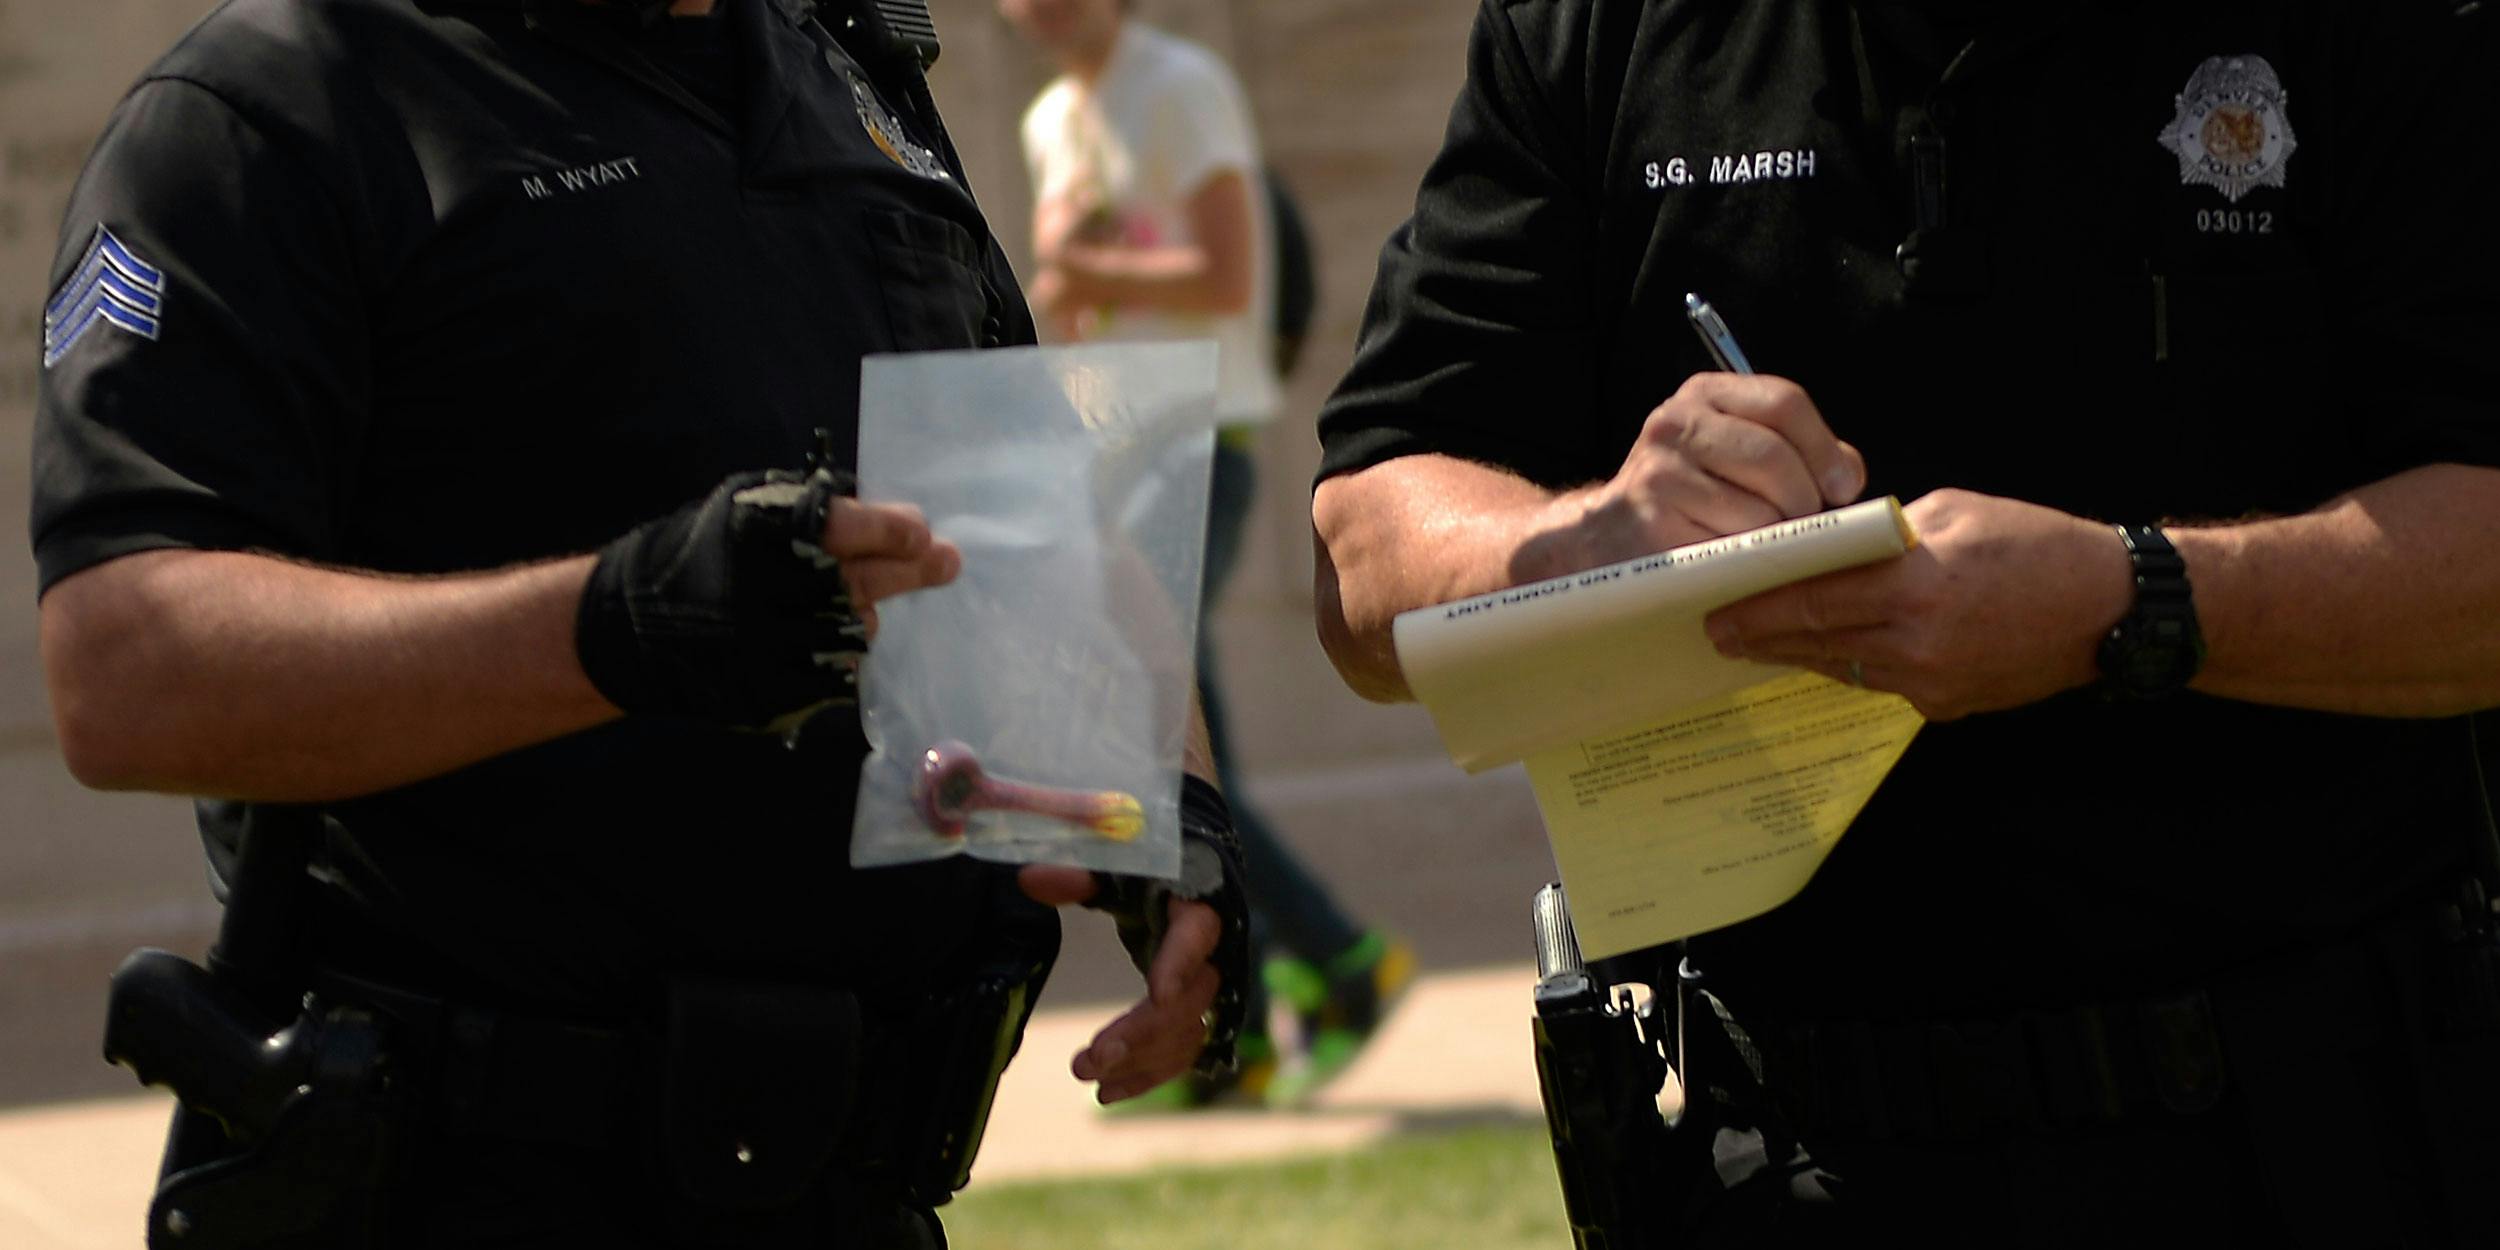 DENVER, CO. - APRIL 20: Denver bicycle police with their bagged evidence as they write one of two tickets to a group of four young men for smoking marijuana in public during the 420 celebration at the Denver 420 Rally in Civic Center Park on April 20, 2014. The El Paso Country Sheriff’s department is now keeping a database in an attempt to show that marijuana legalization increases crime. (Photo By Joe Amon/The Denver Post via Getty Images)